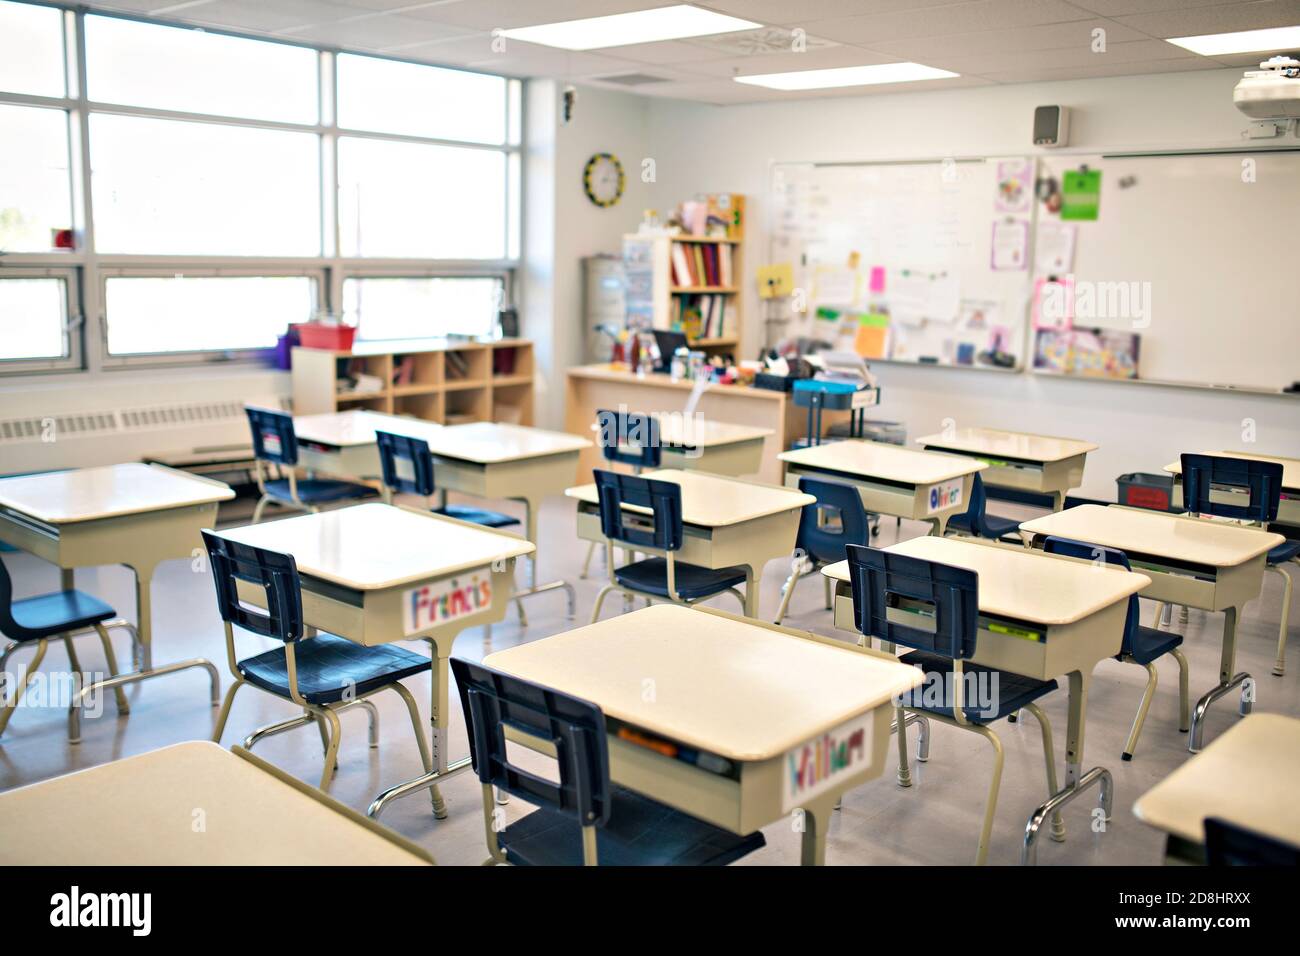 A classroom of a daycare center without children and teacher Stock Photo